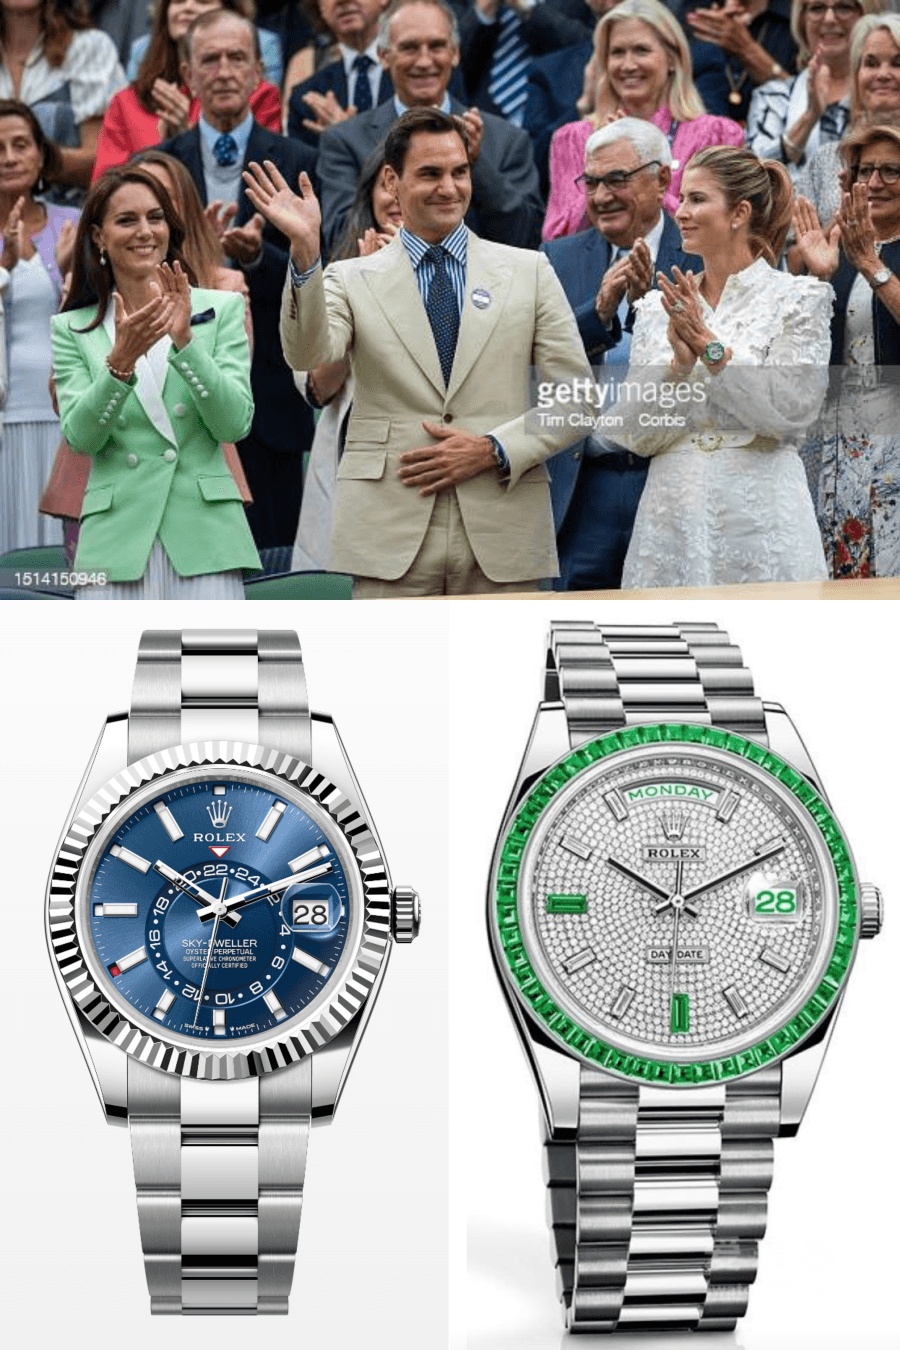 Roger & Mirka Federer wearing white gold Sky-Dweller with a blue dial &  platinum Day-Date with an emerald set bezel respectively